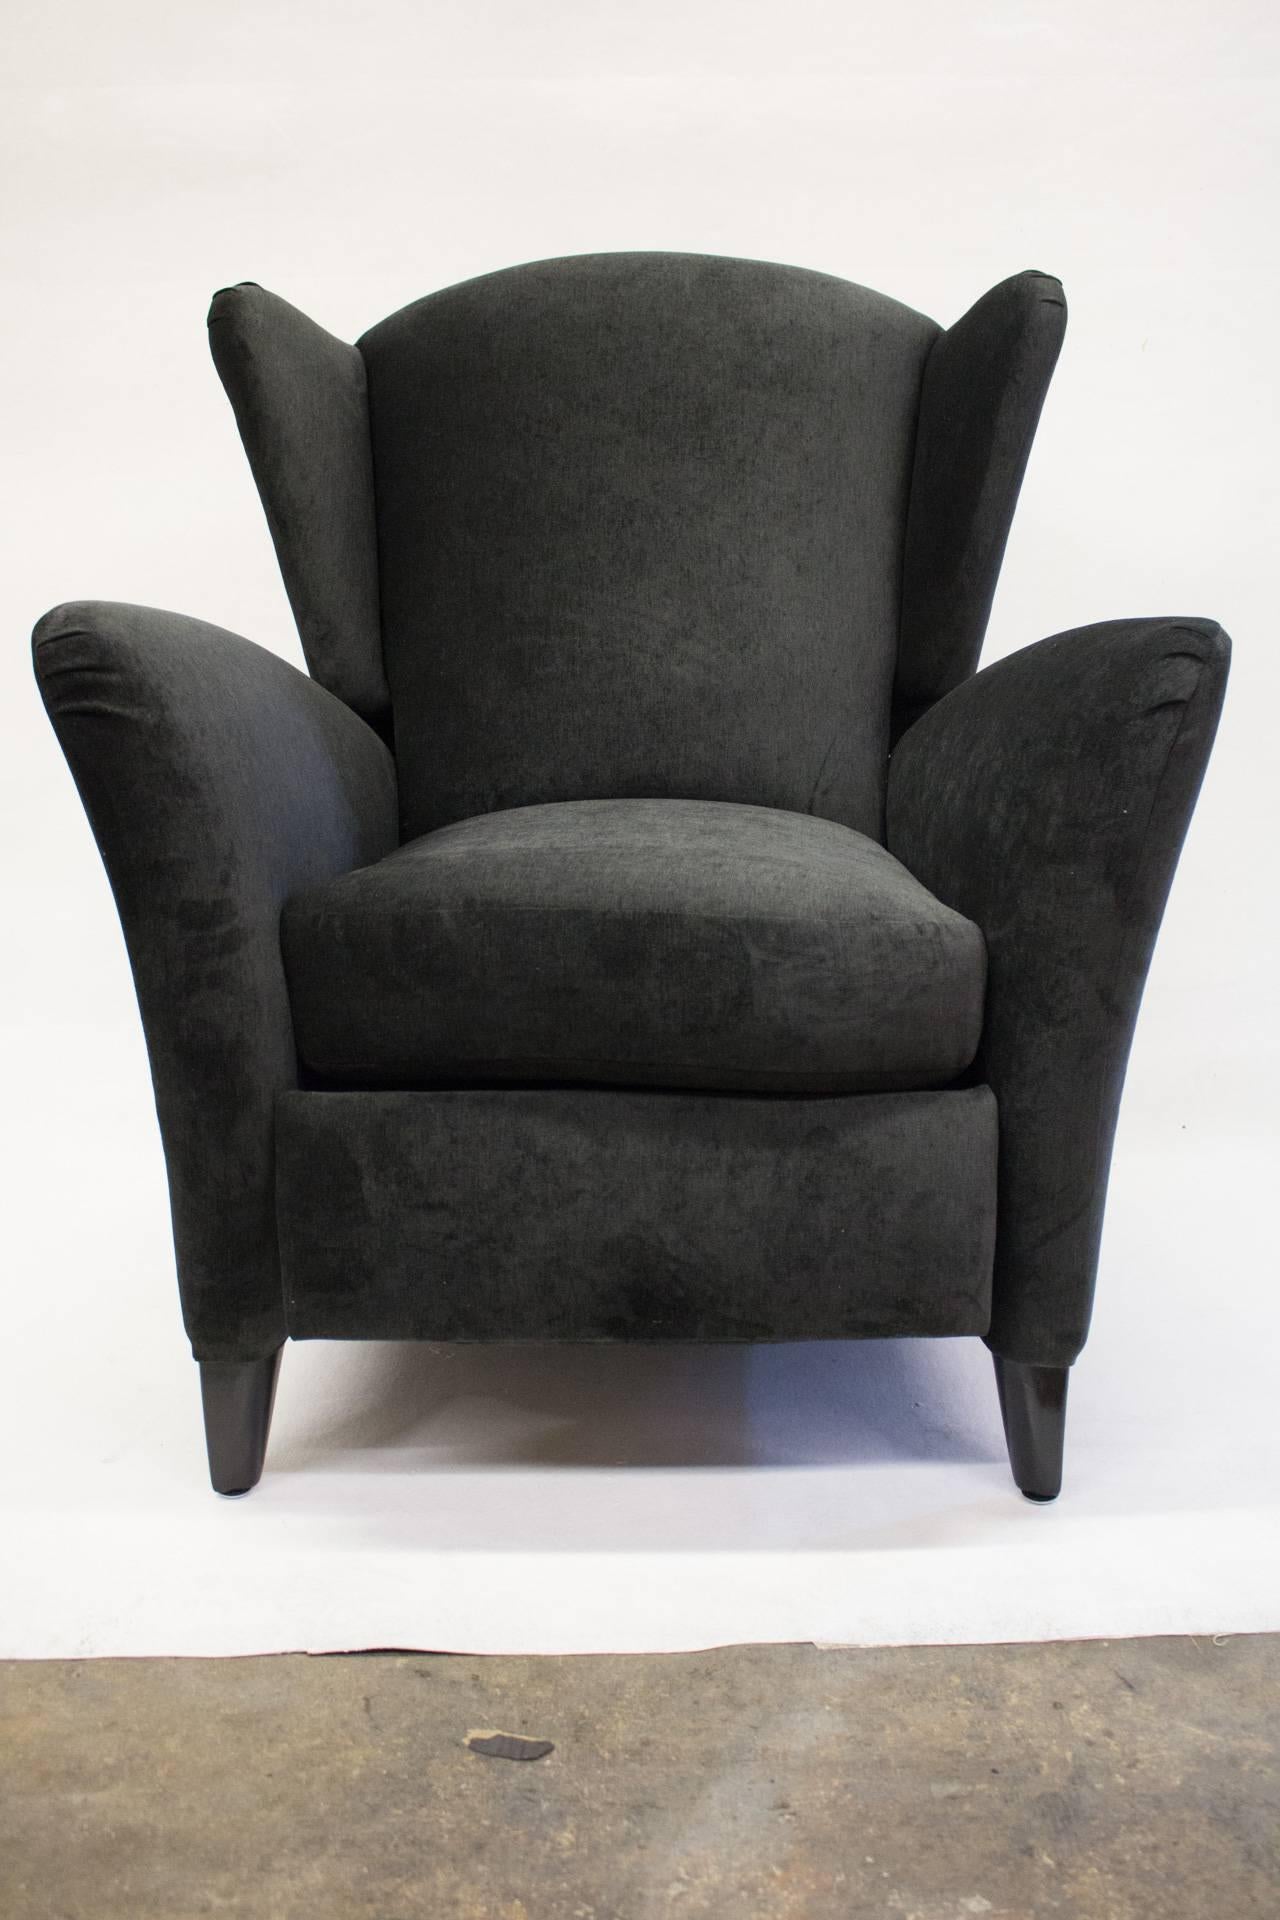 This Mid-Century reclining chair is upholstered in a thin black velvet with a high back with wings. It features black stained tapered wood feet. The back flares out to accentuate the comfort.